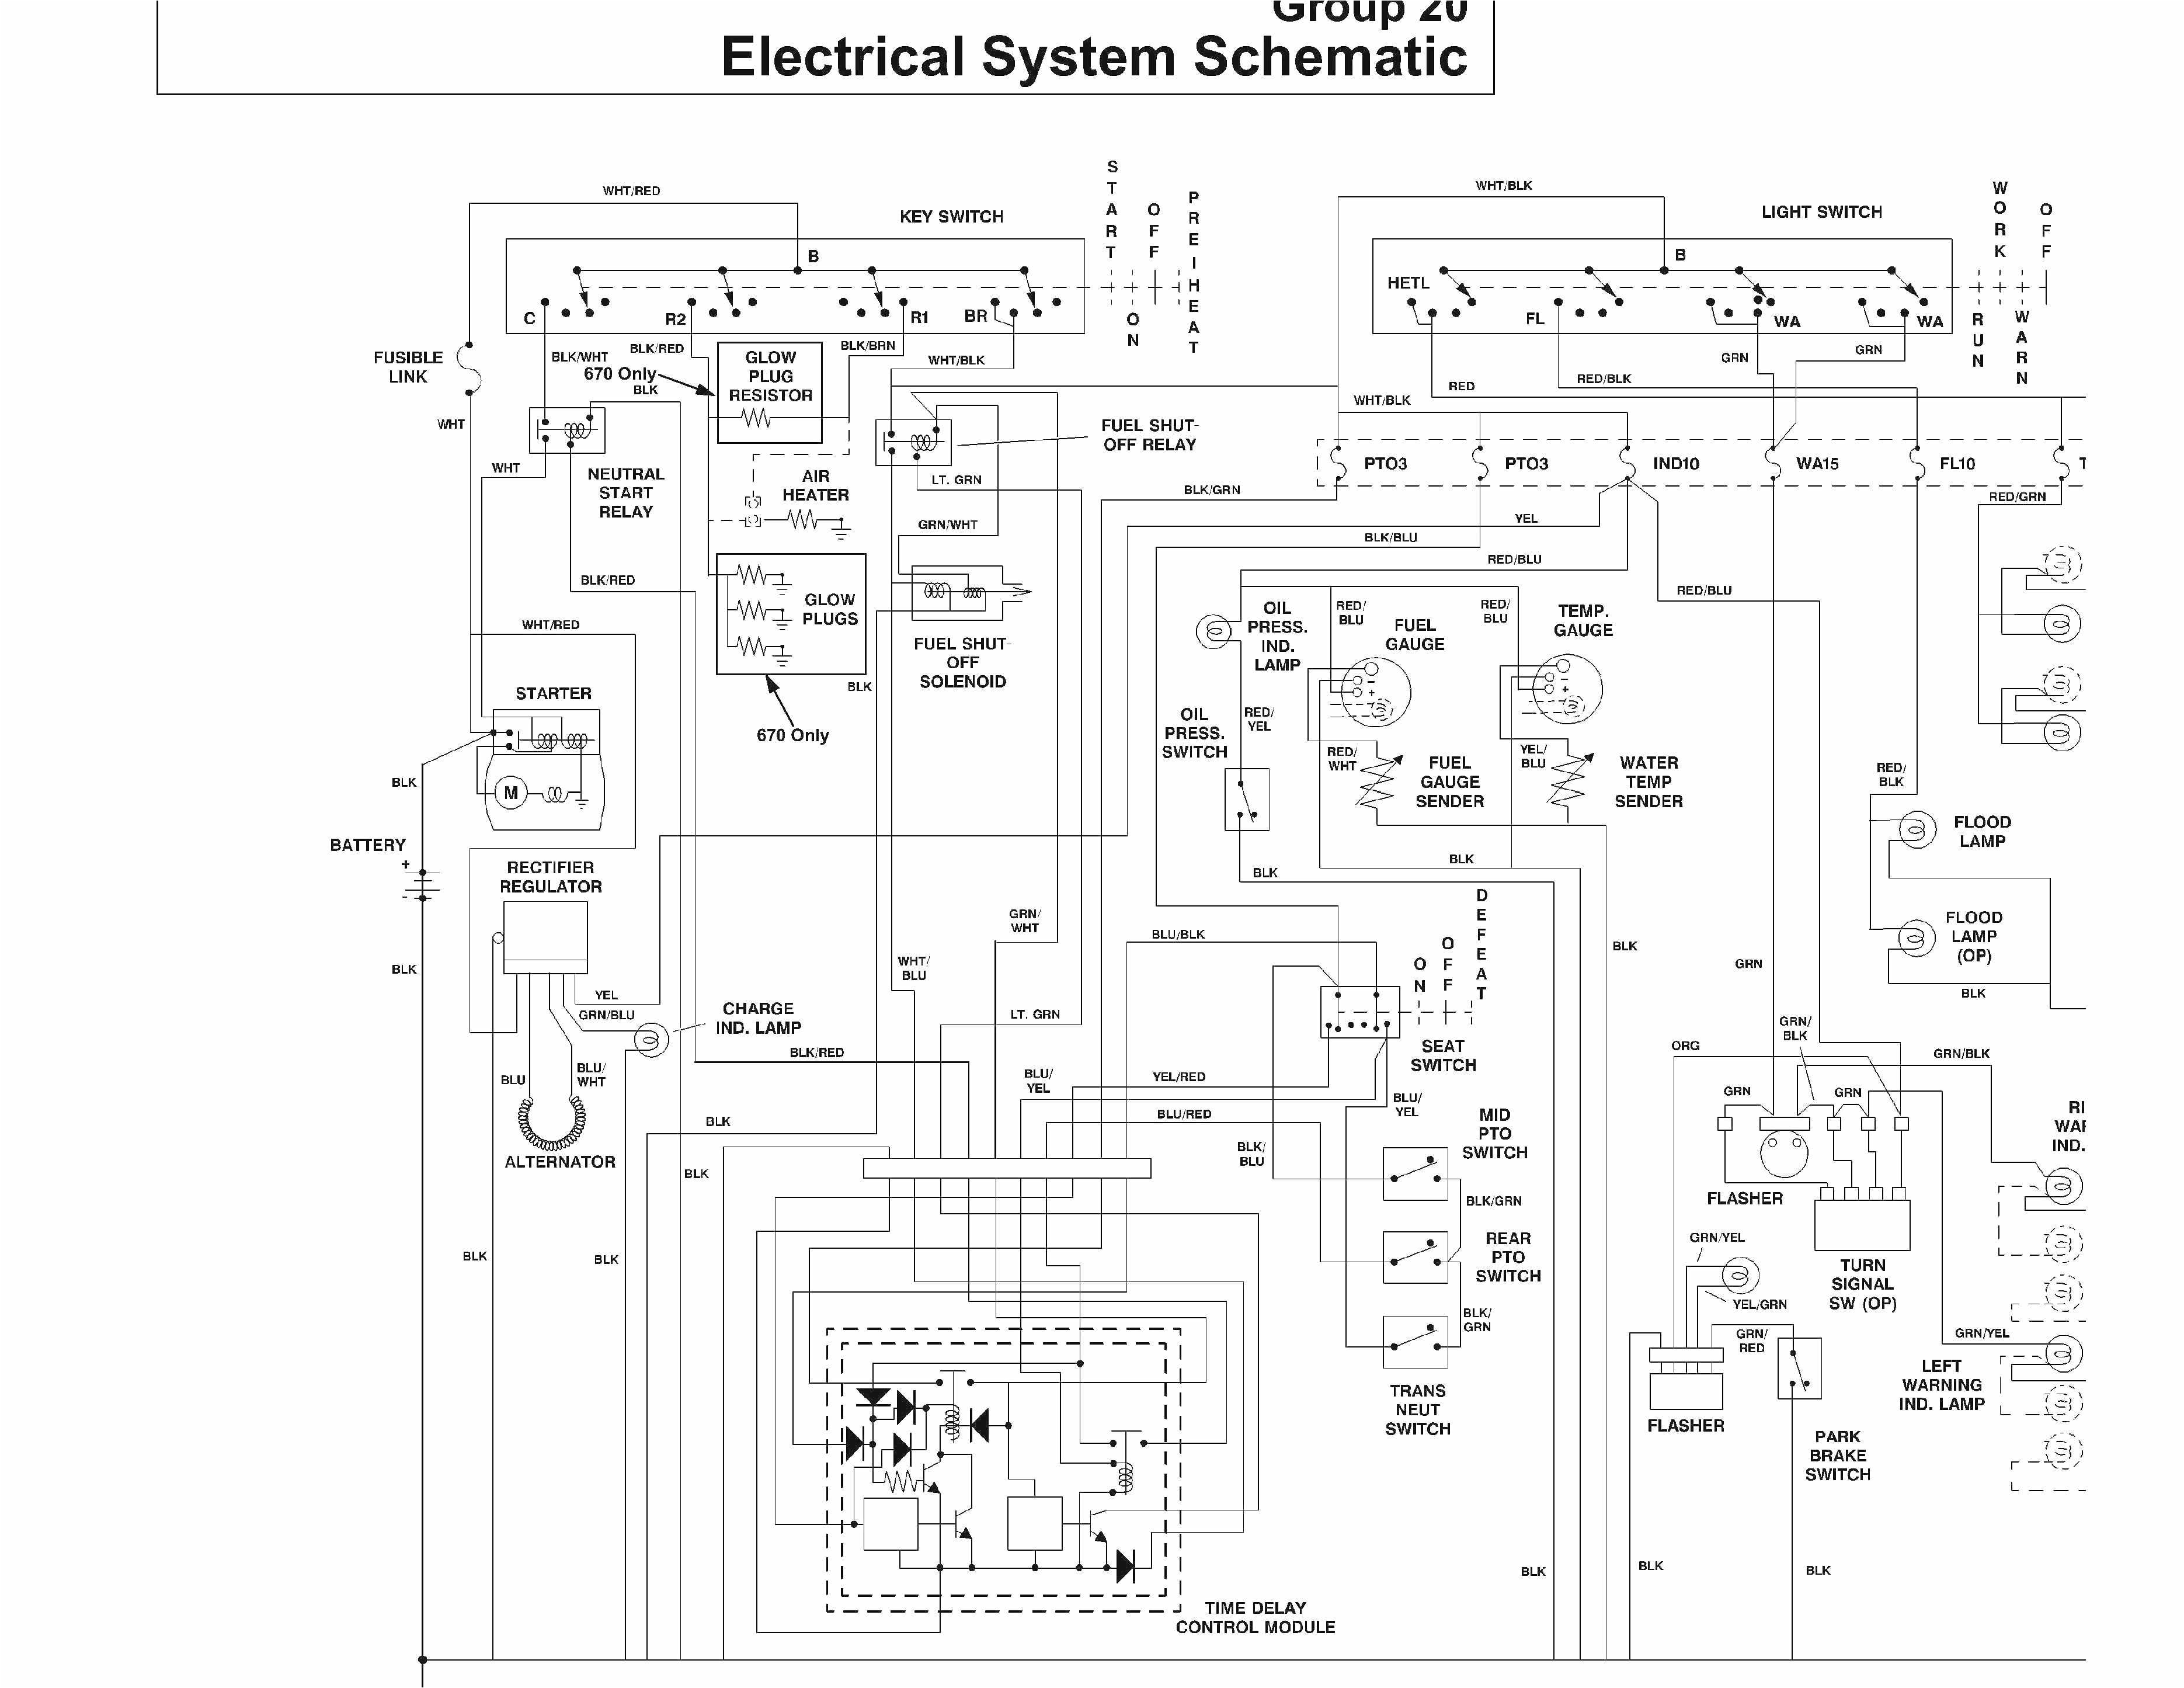 wiring diagram for a light switch on jd 2940 switch awesome john deere g100 wiring diagram of wiring diagram for a light switch on jd 2940 switch jpg